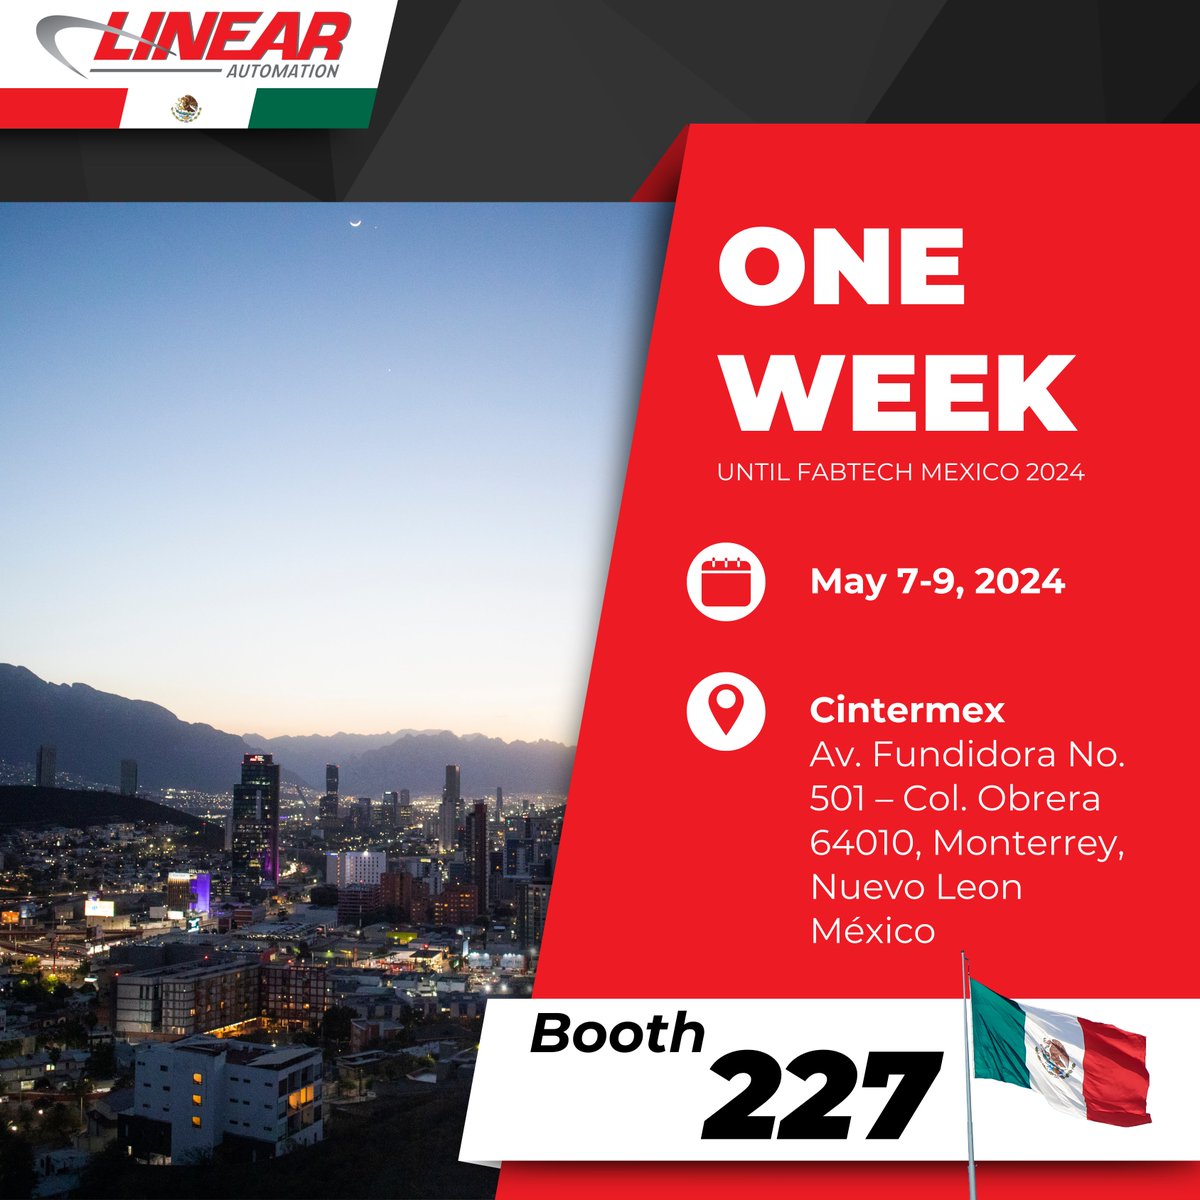 We are only ONE WEEK away from FABTECH MÉXICO 2024!

📅 May 7th-9th, 2024
📍 Cintermex - Monterrey, Mexico

Take advantage of the chance to visit booth 227, where Linear Automation Inc. is showcasing our premium metal forming automation solutions, setting the industry standard.